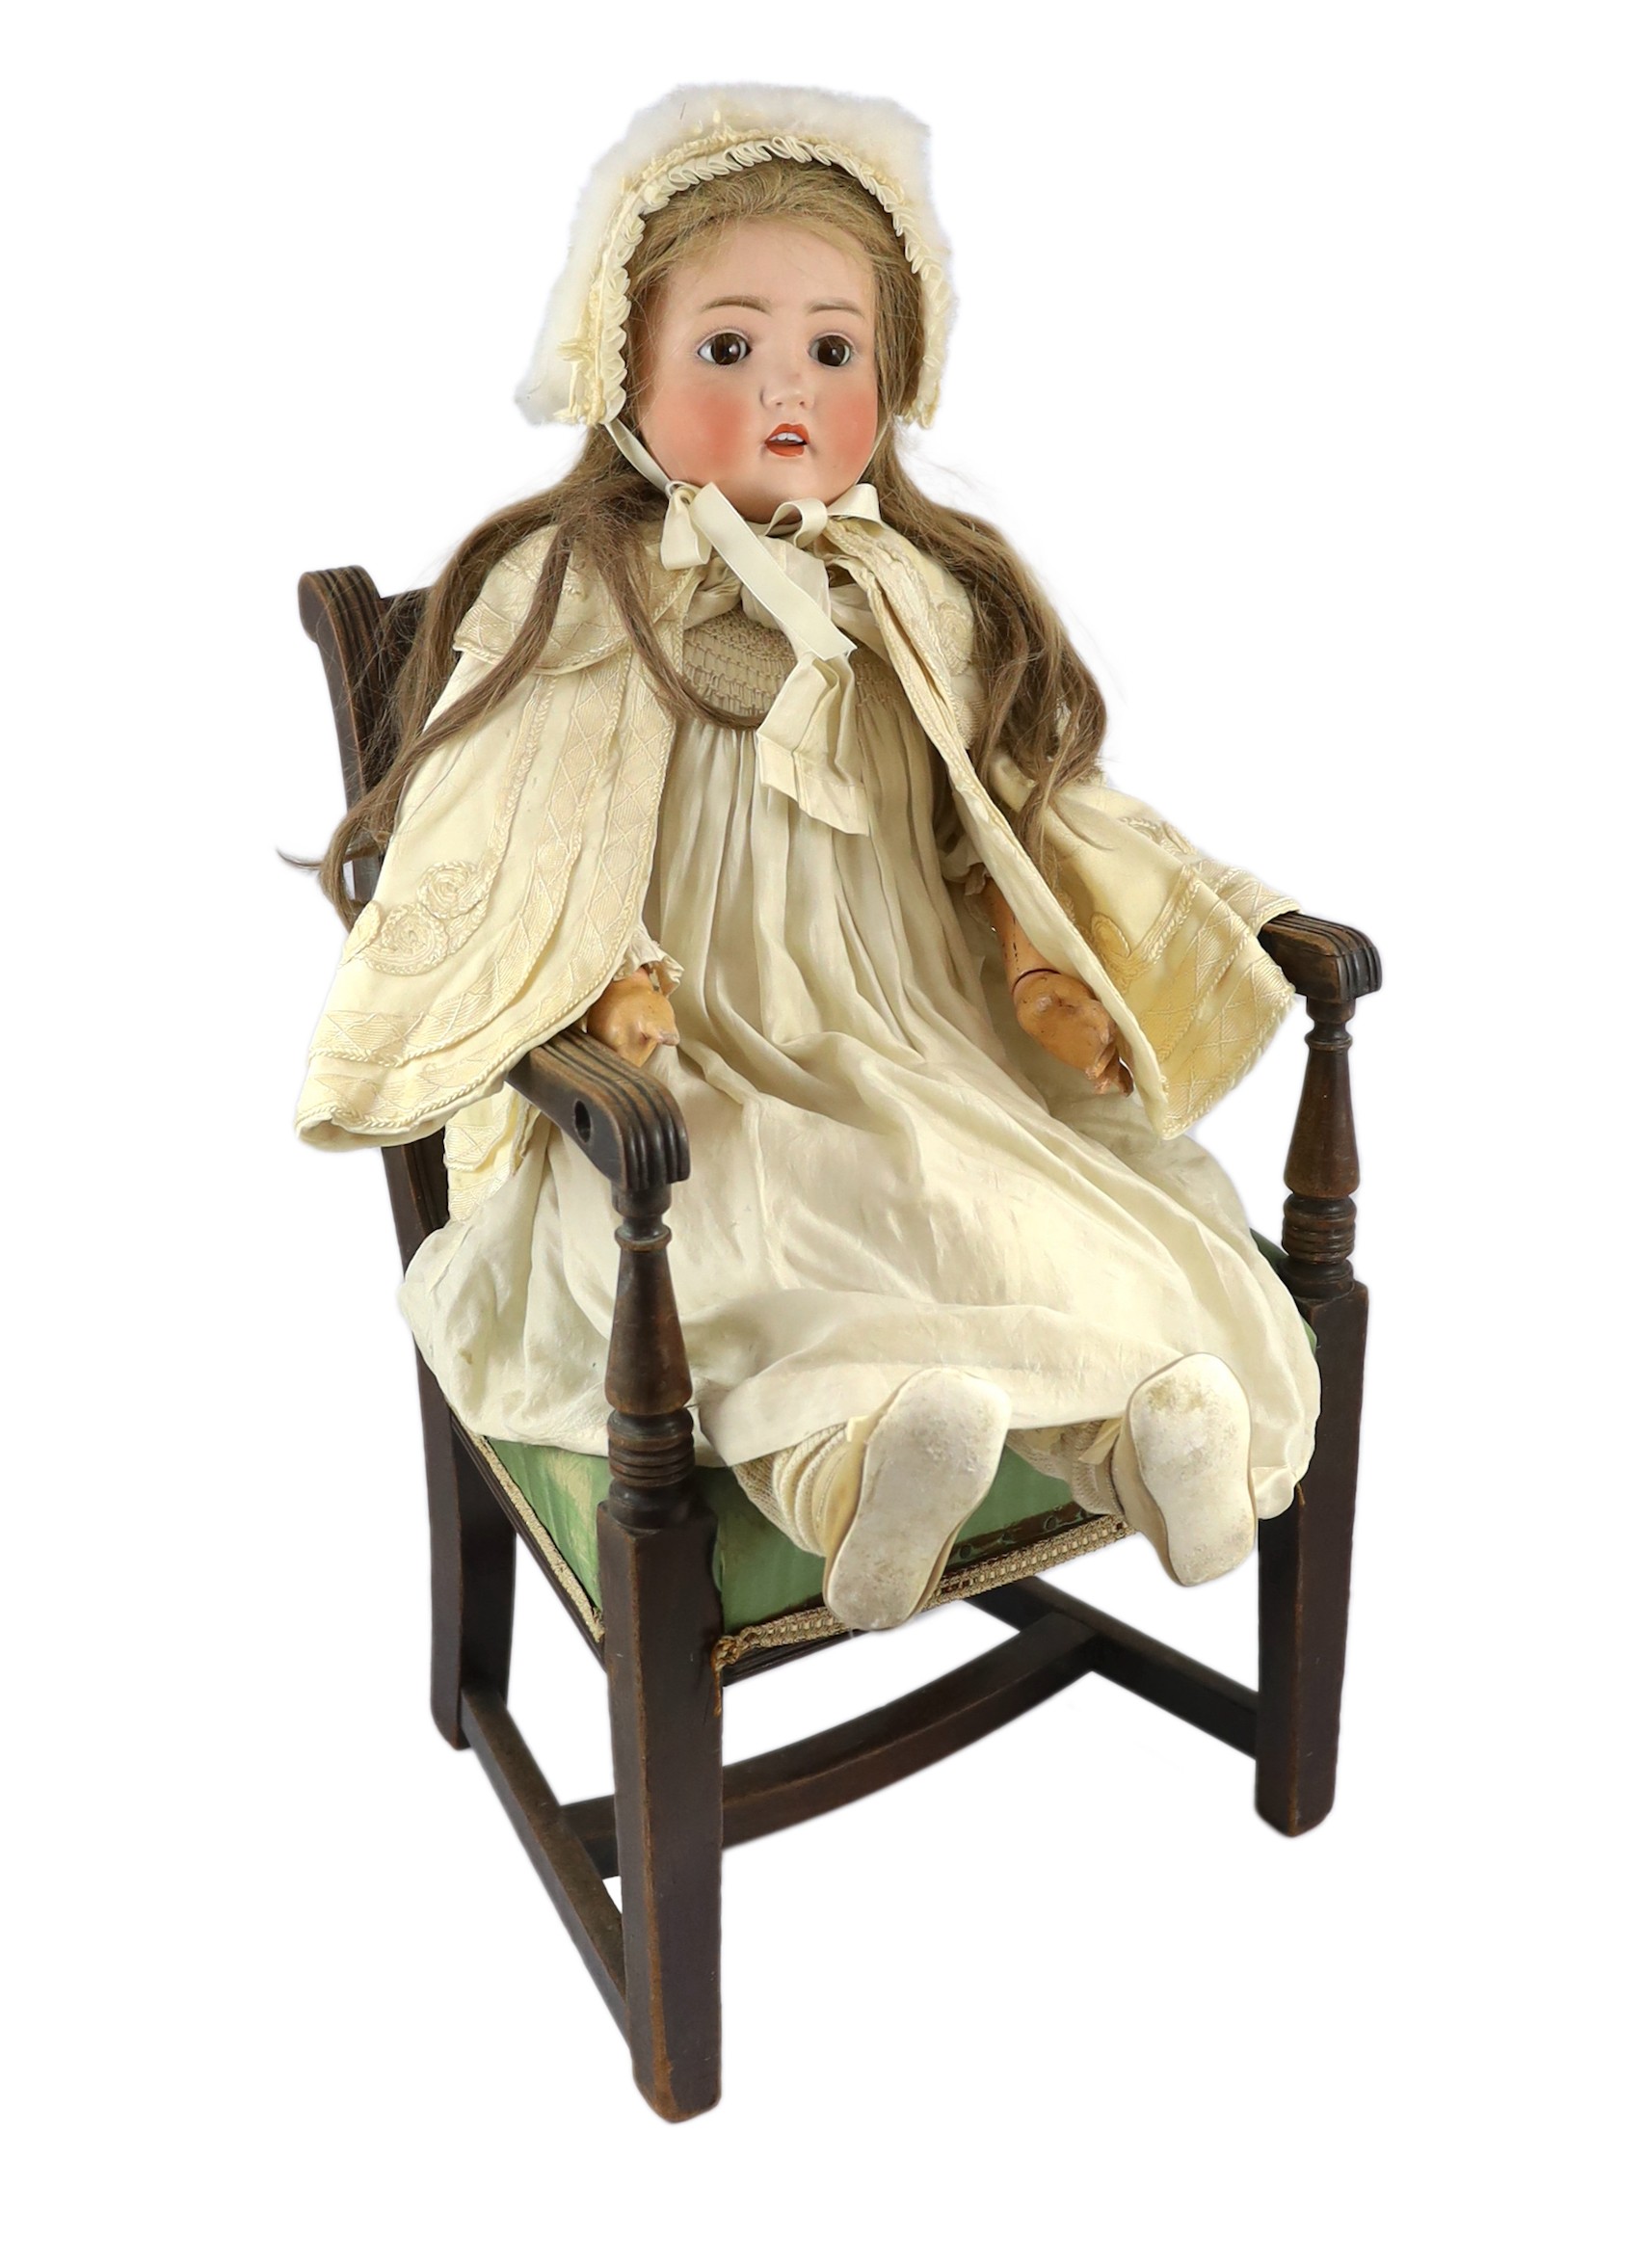 A J.D. Kestner large bisque doll, German, circa 1916, 31in. Please note the chair is for display purposes only.                                                                                                             